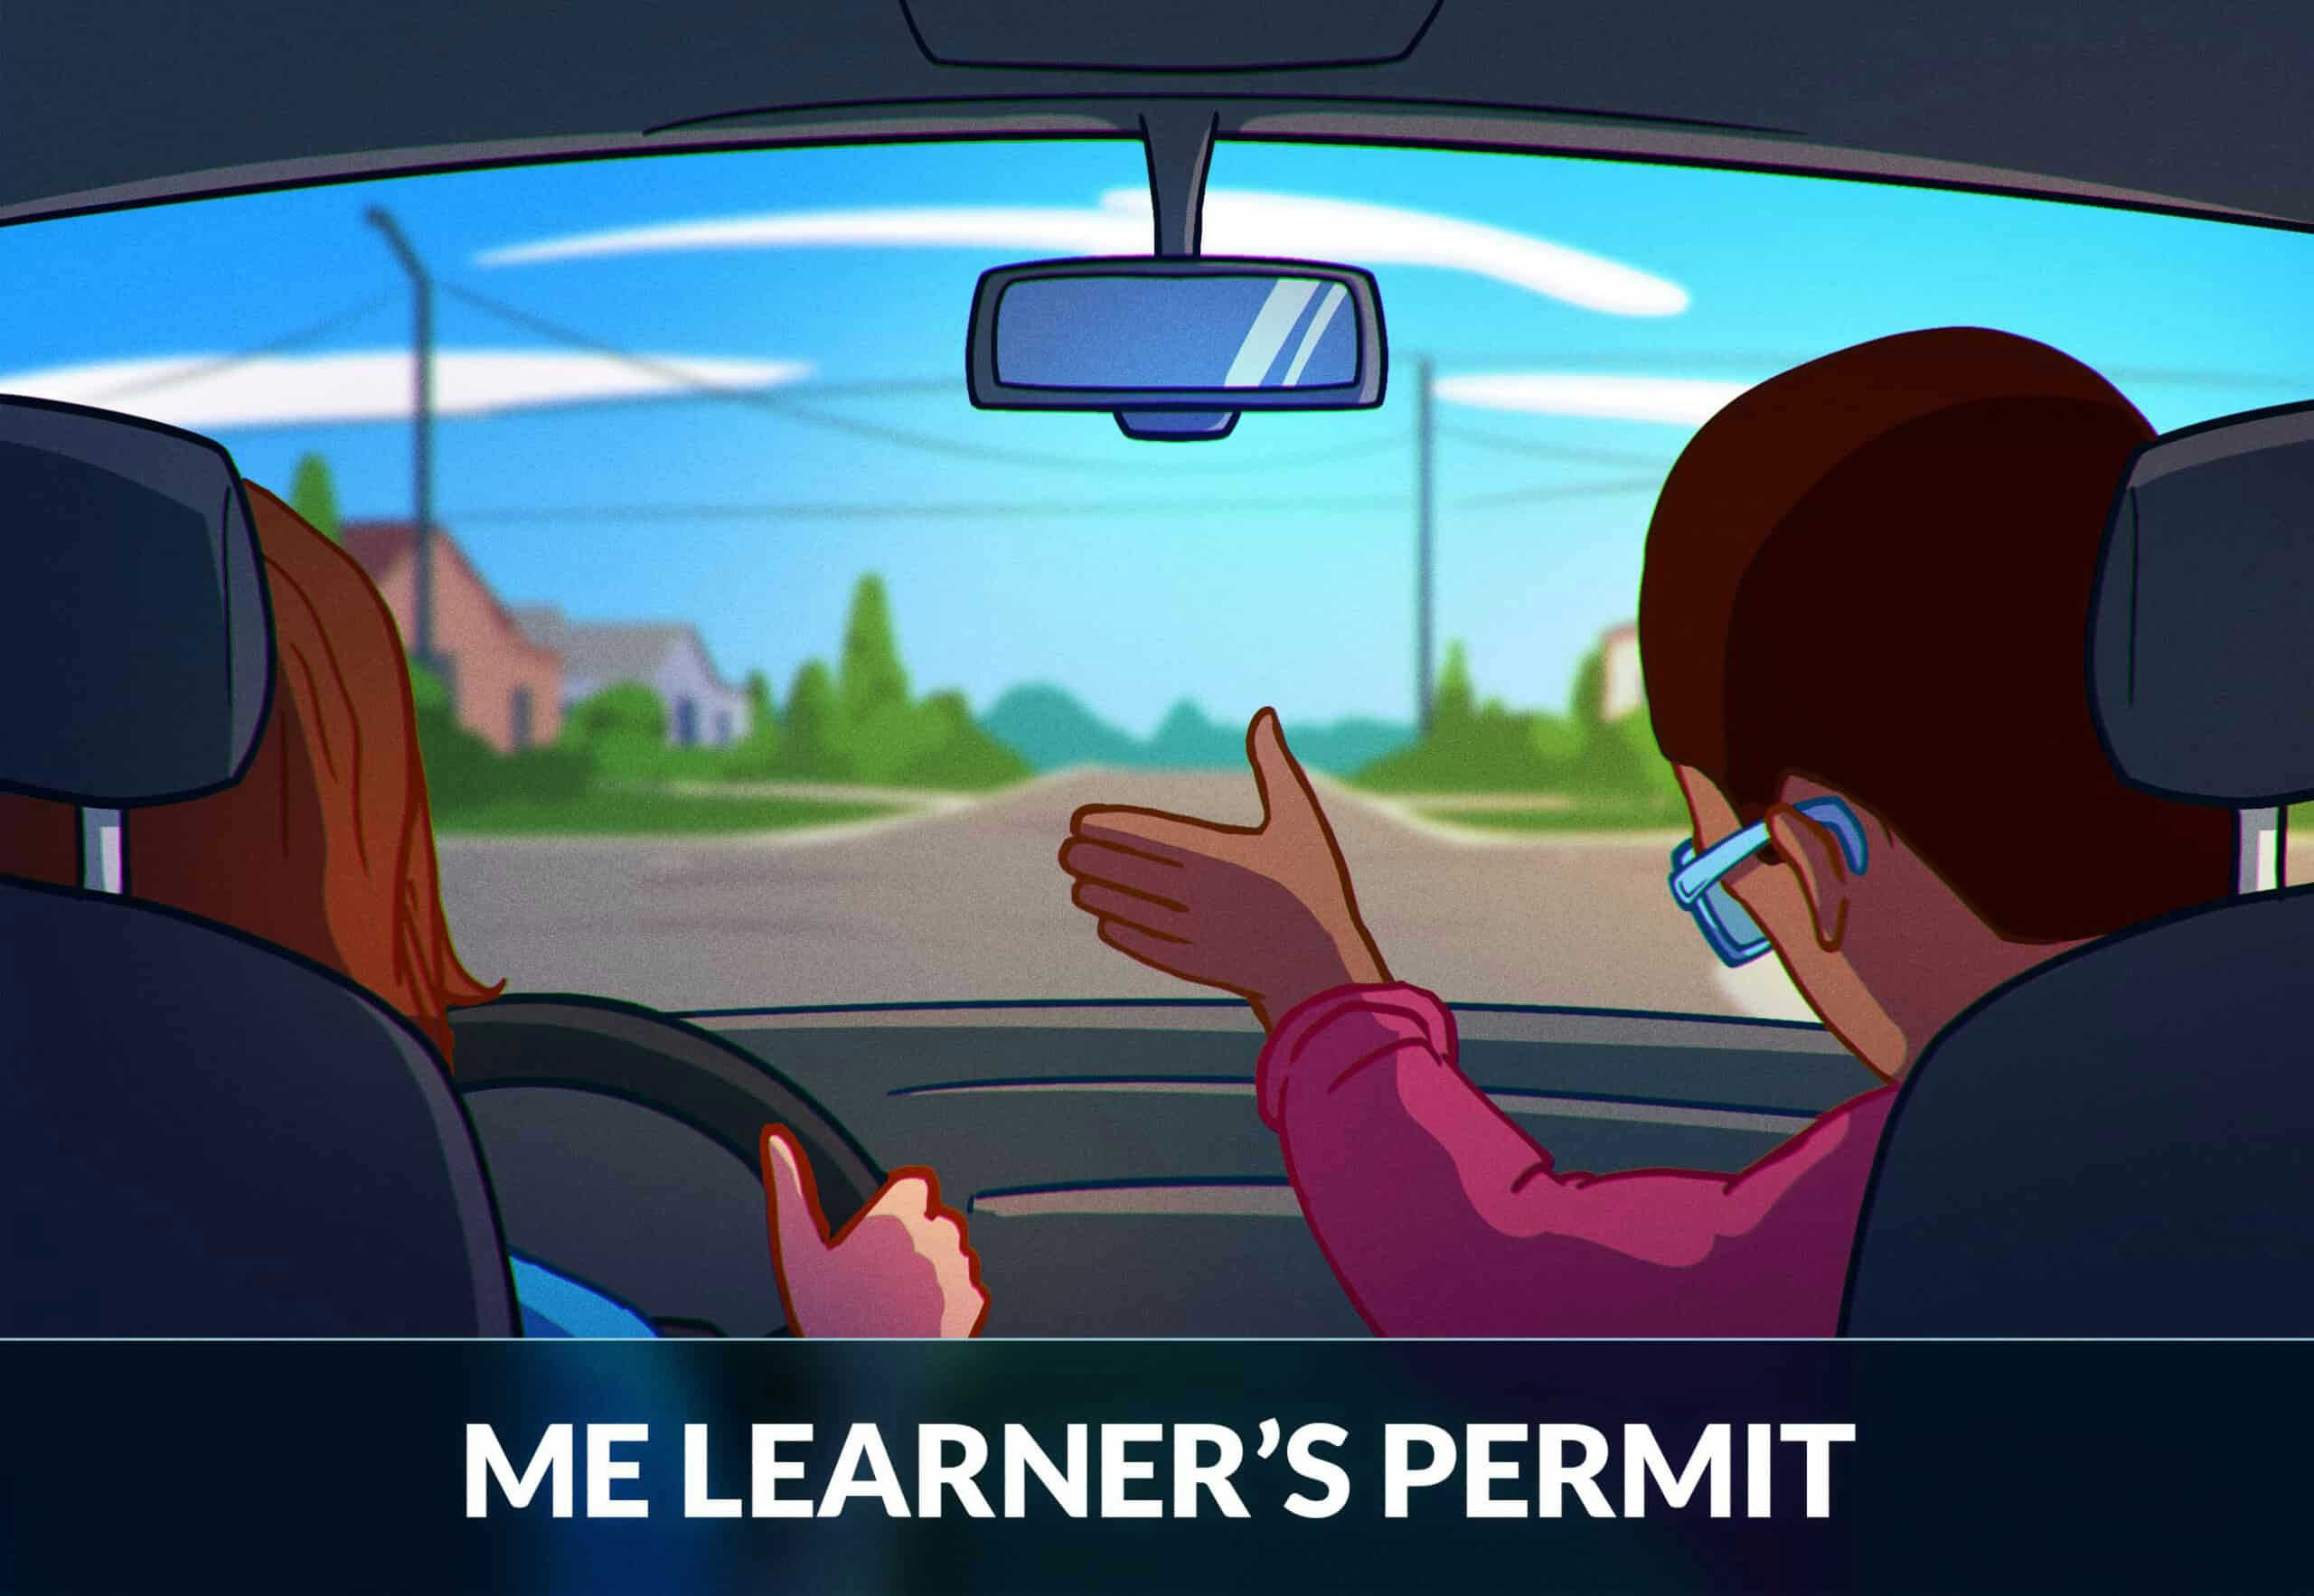 Maine learner's permit